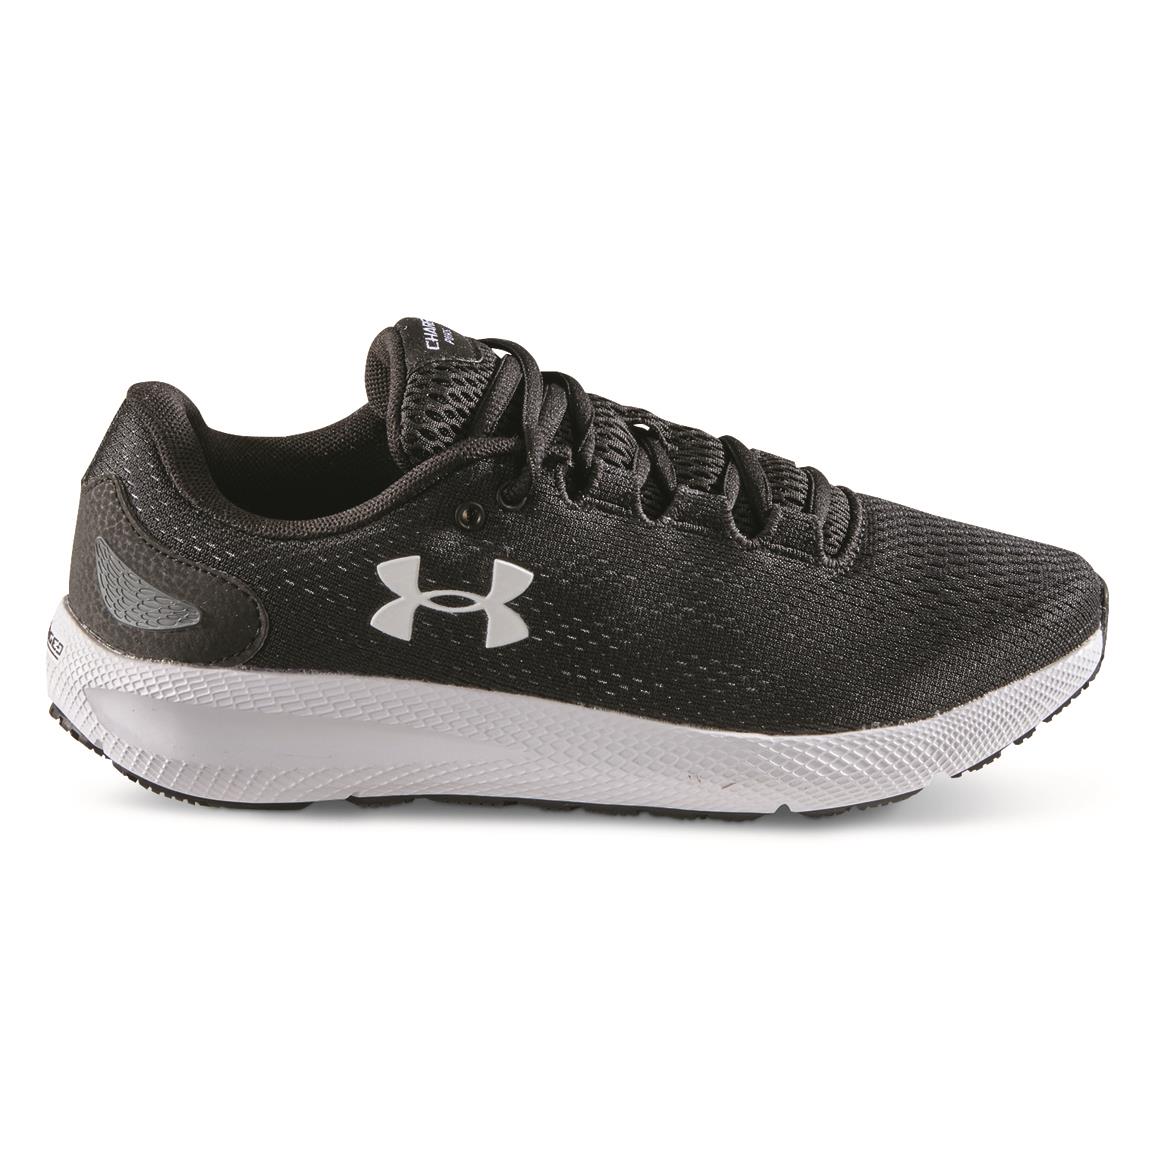 Under Armour Shoes | Sportsman's Guide